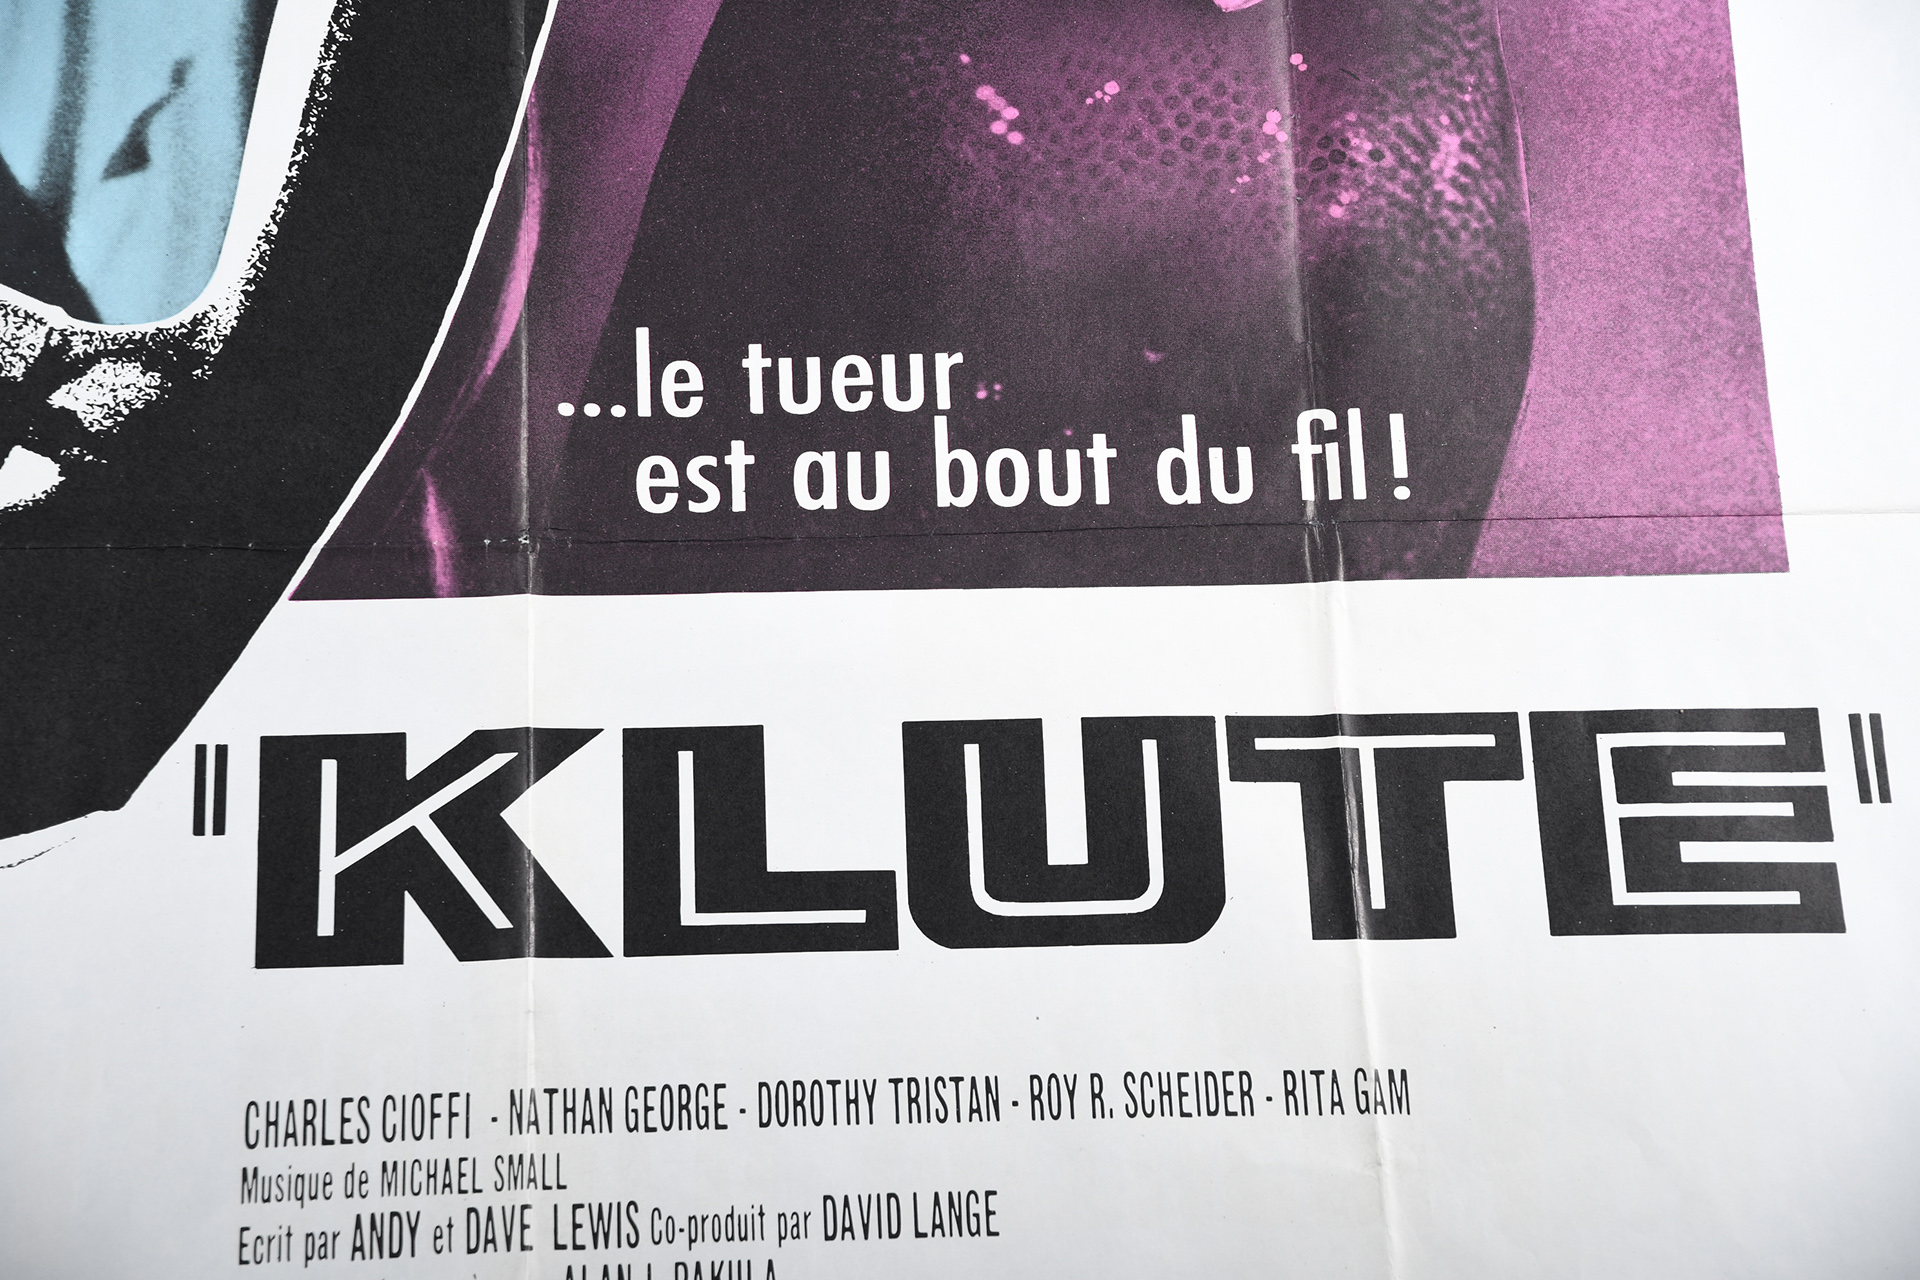 French Cinema Poster of 1971 Film "Klute"